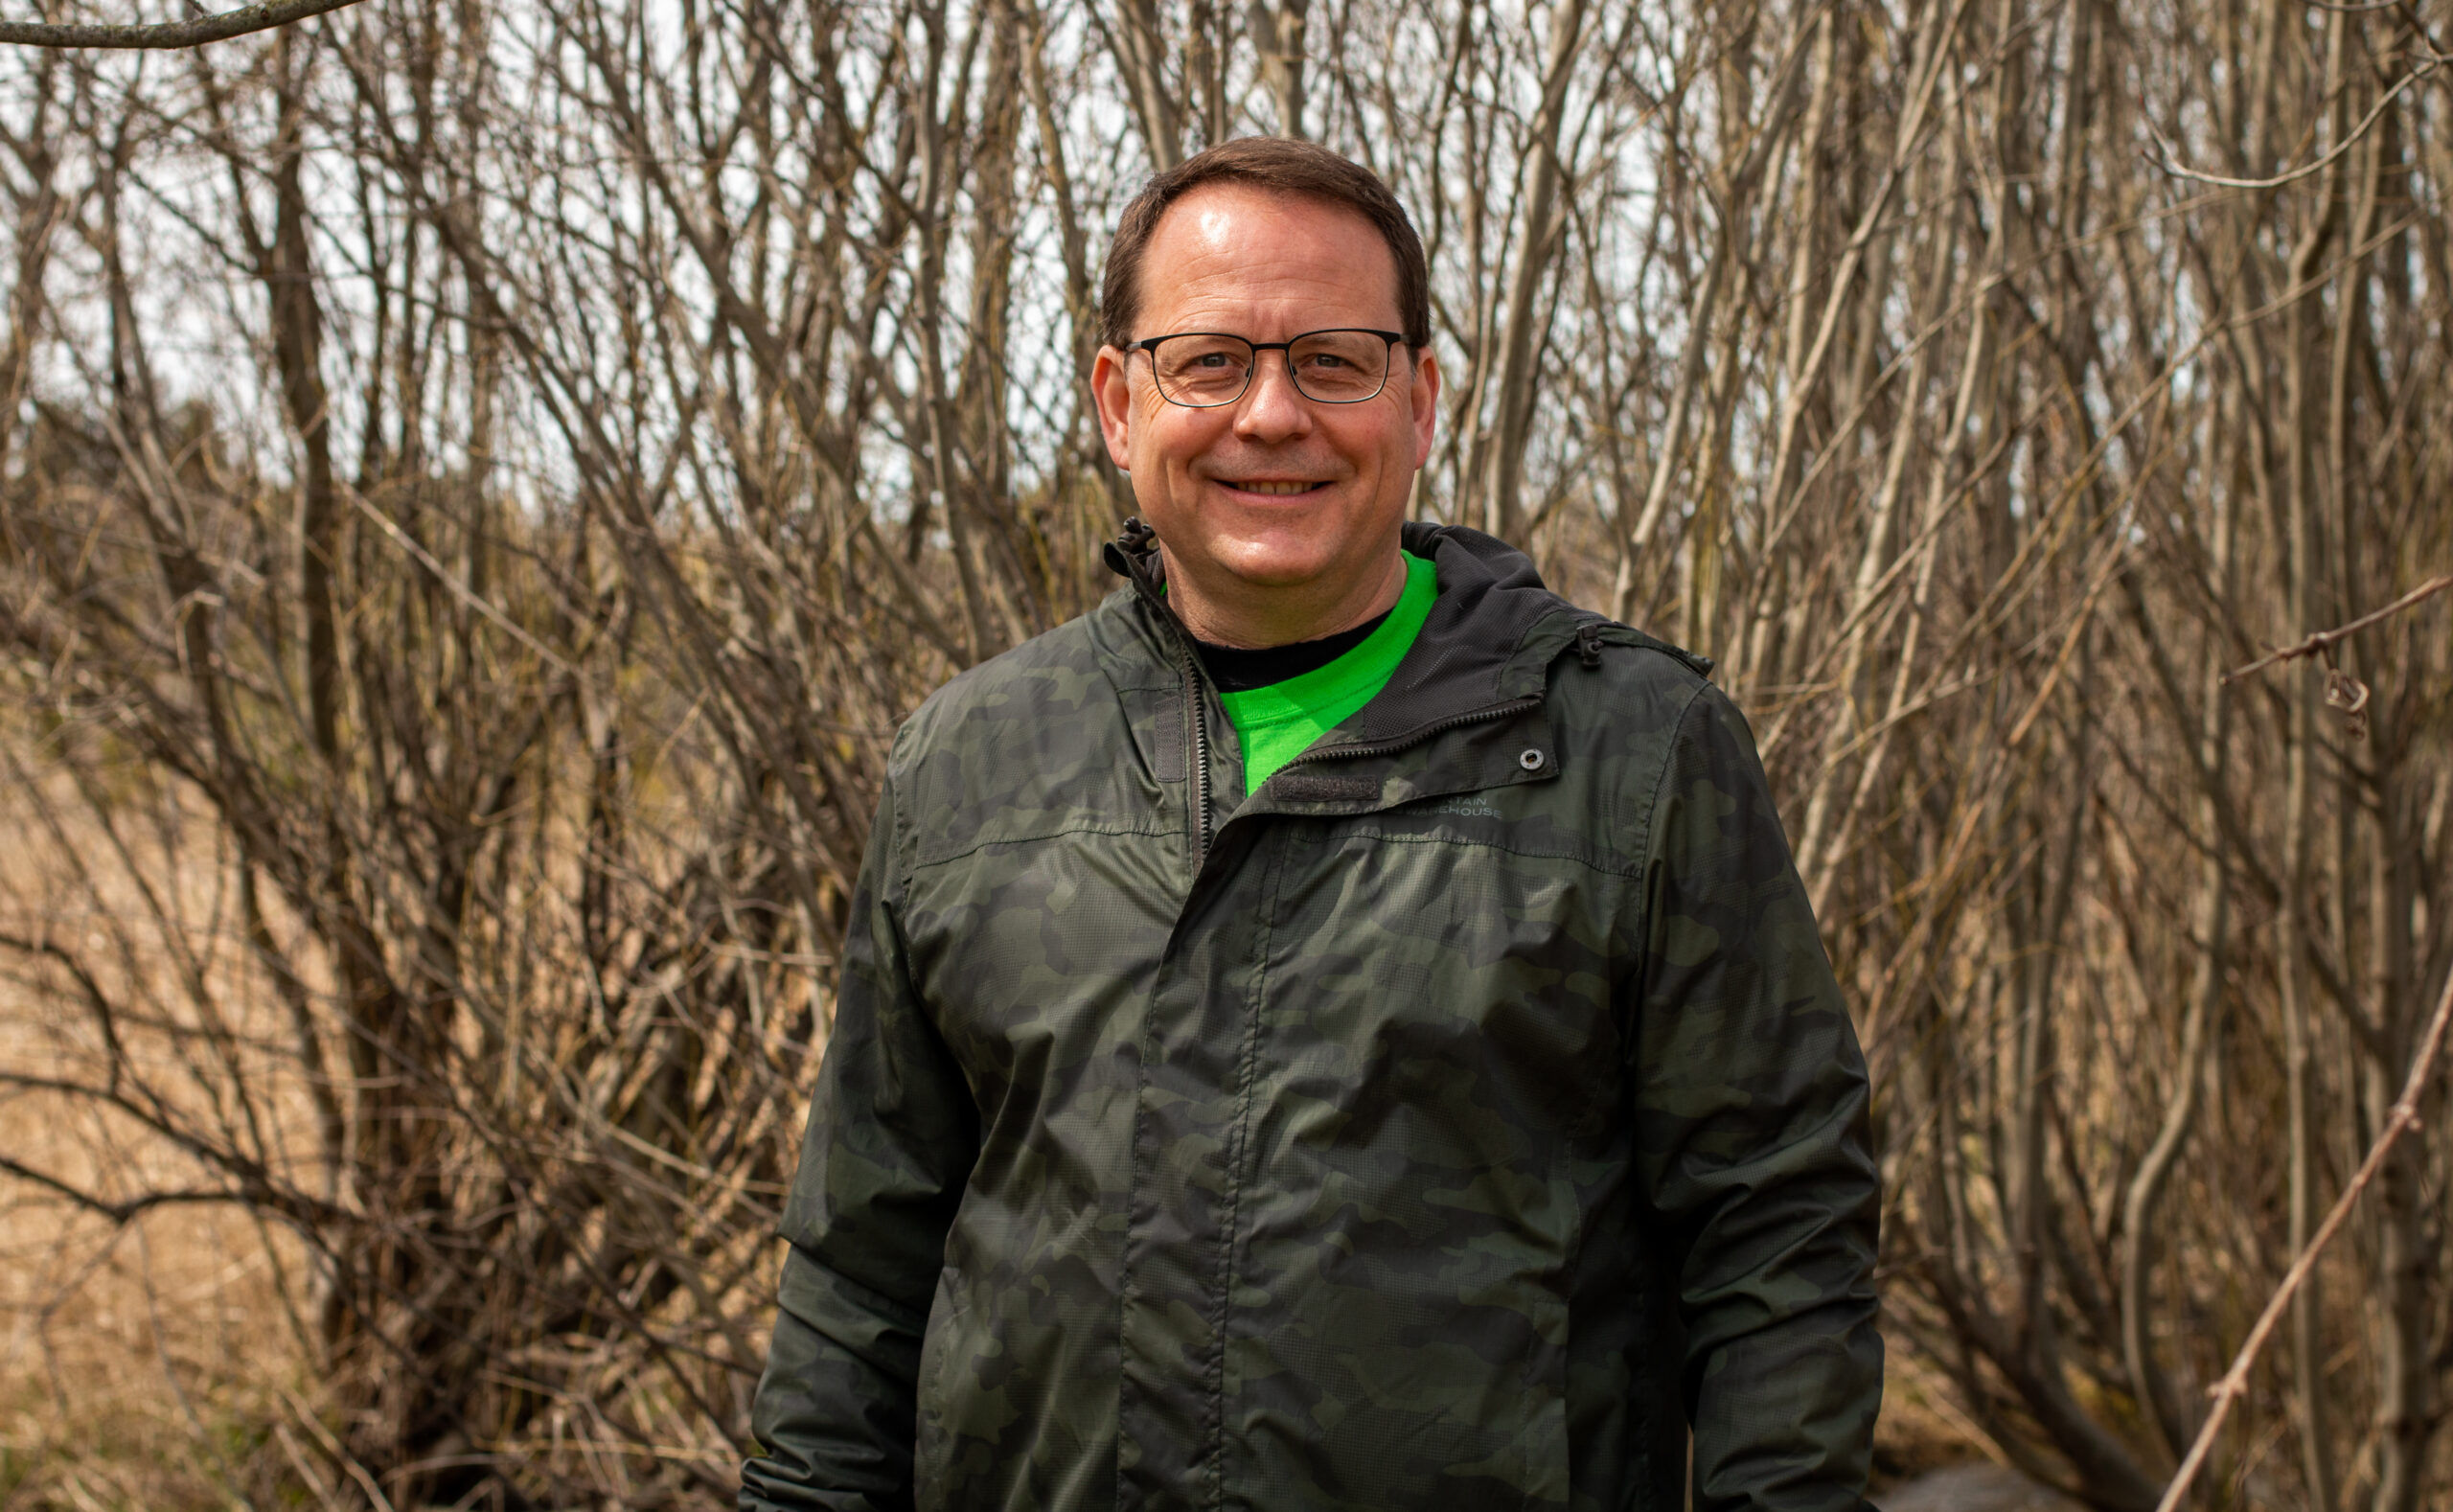 Ontario election 2022: Mike Schreiner smiles facing the camera in front of trees with bare branches.